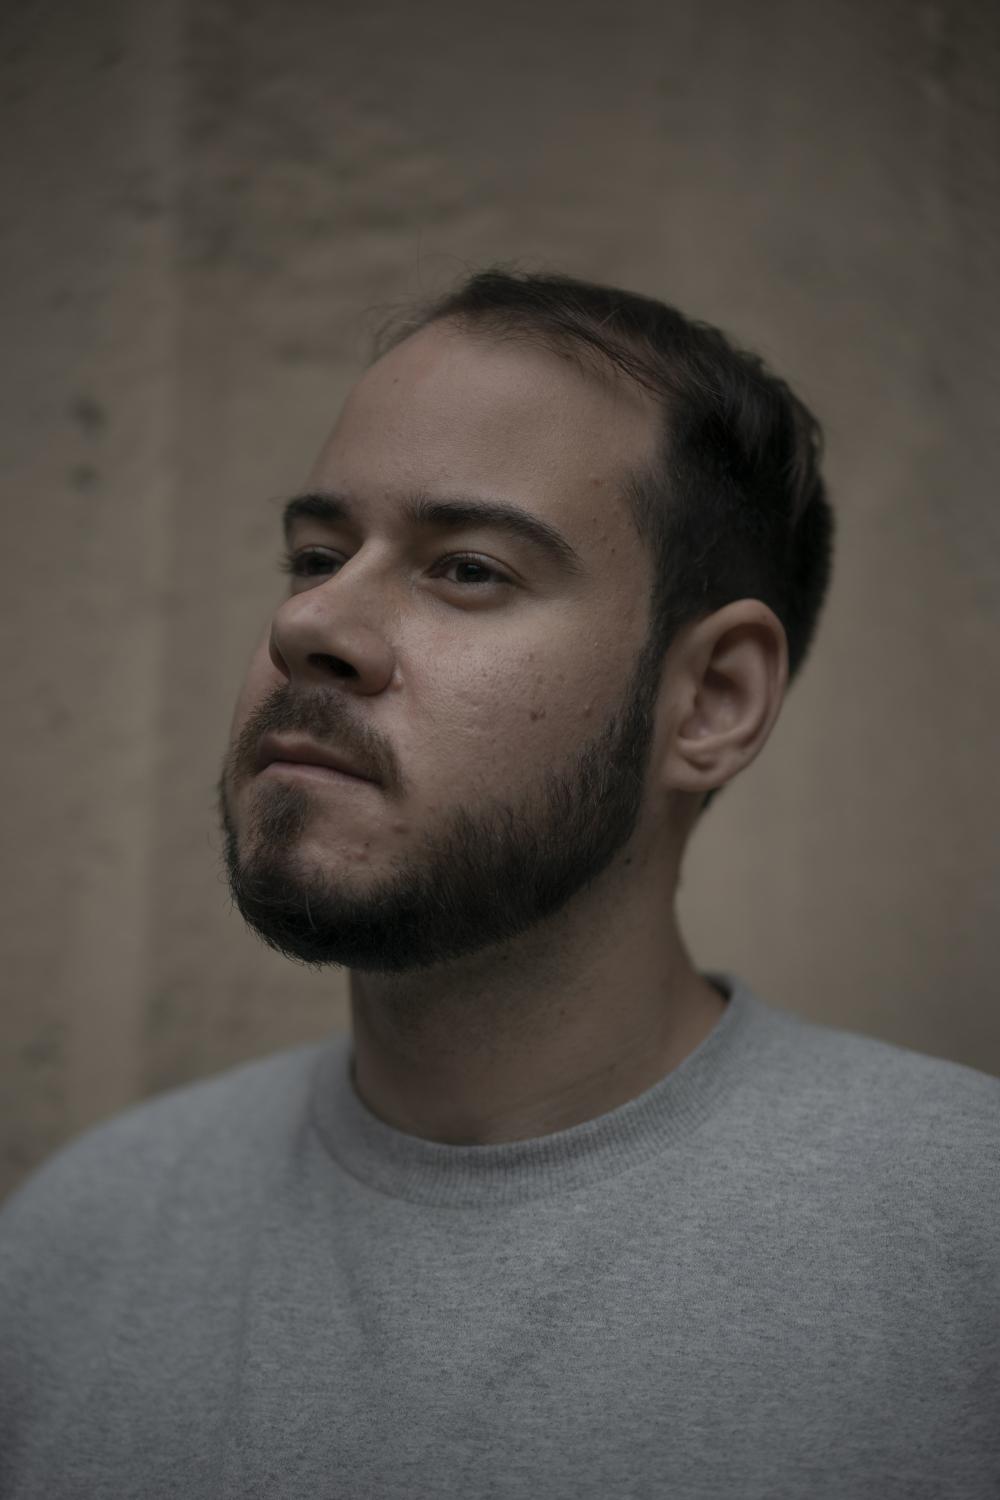 Pablo Hasel Imprisonment  - Rapper in Spain and dozens of his supporters have locked...